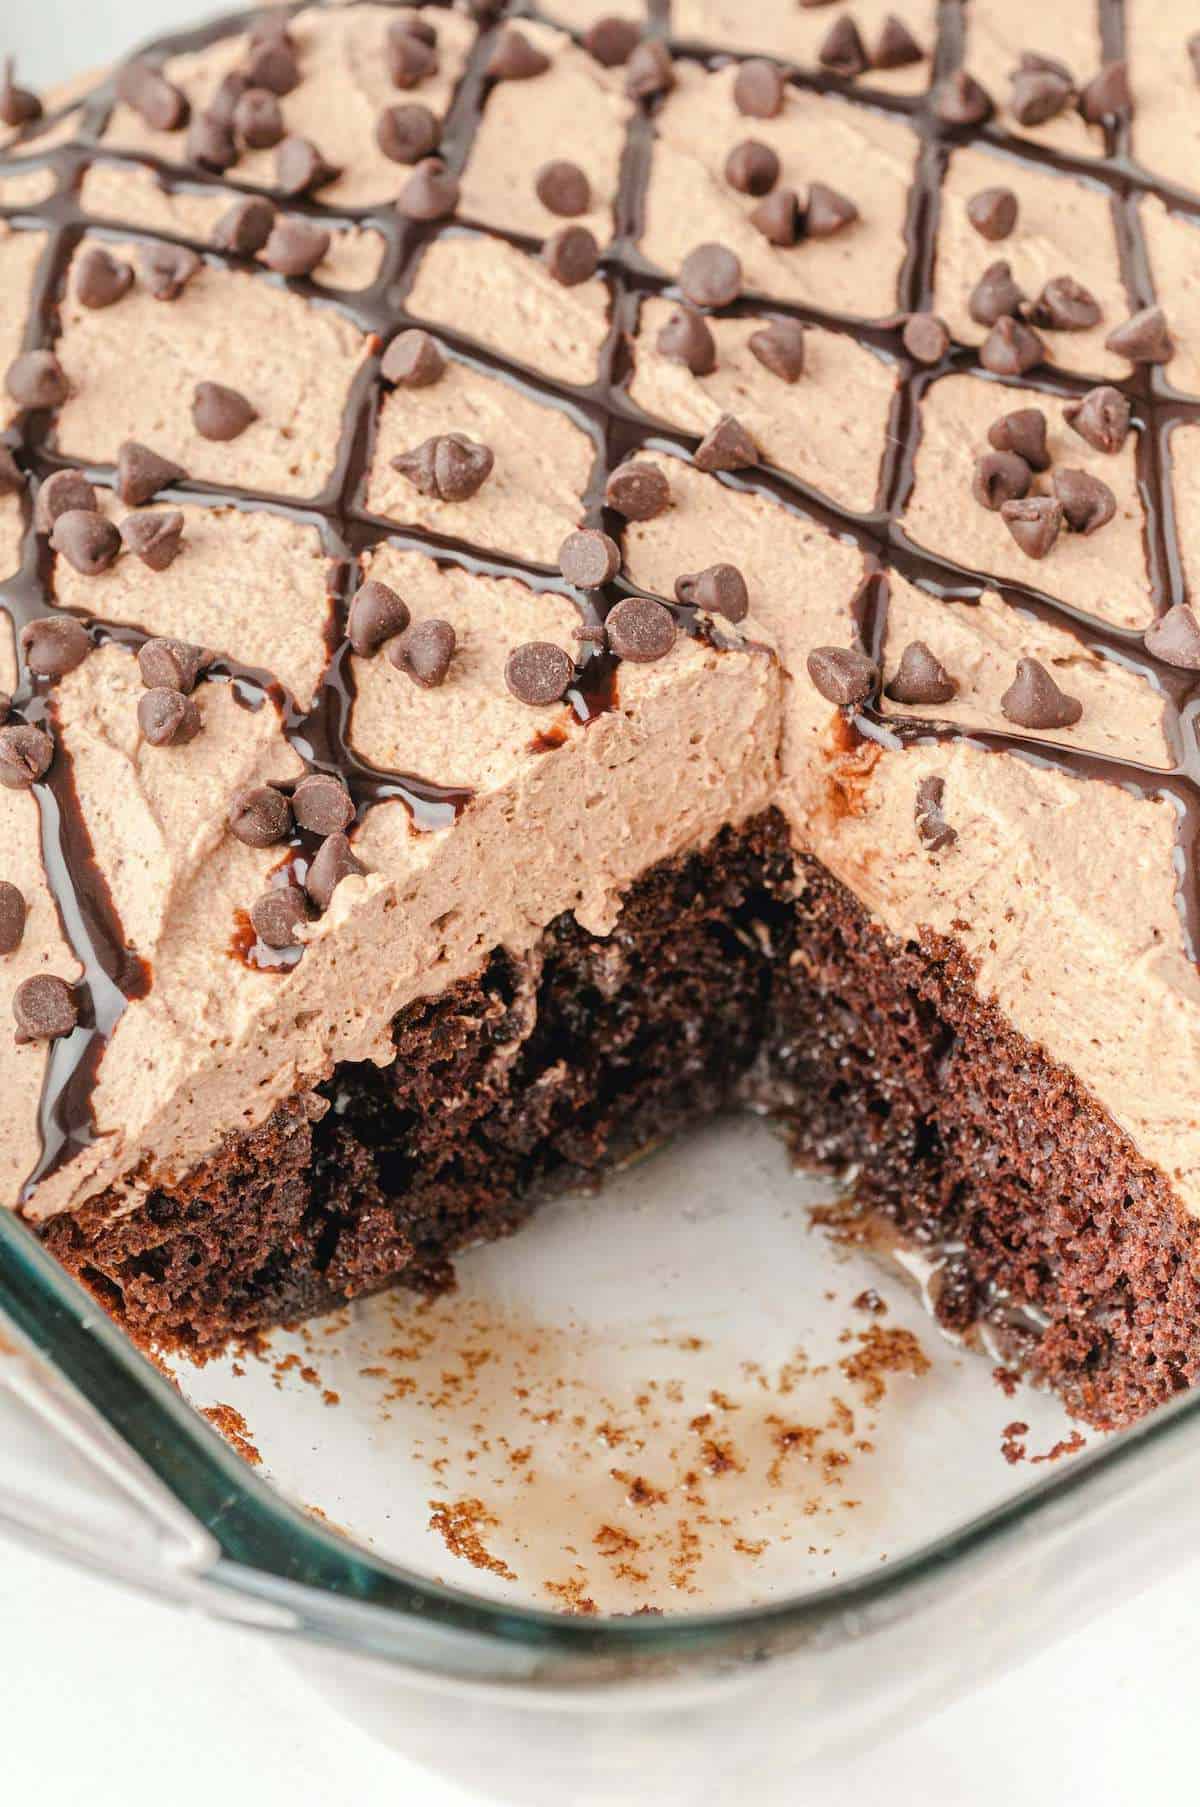 showing the inside of the chocolate poke cake